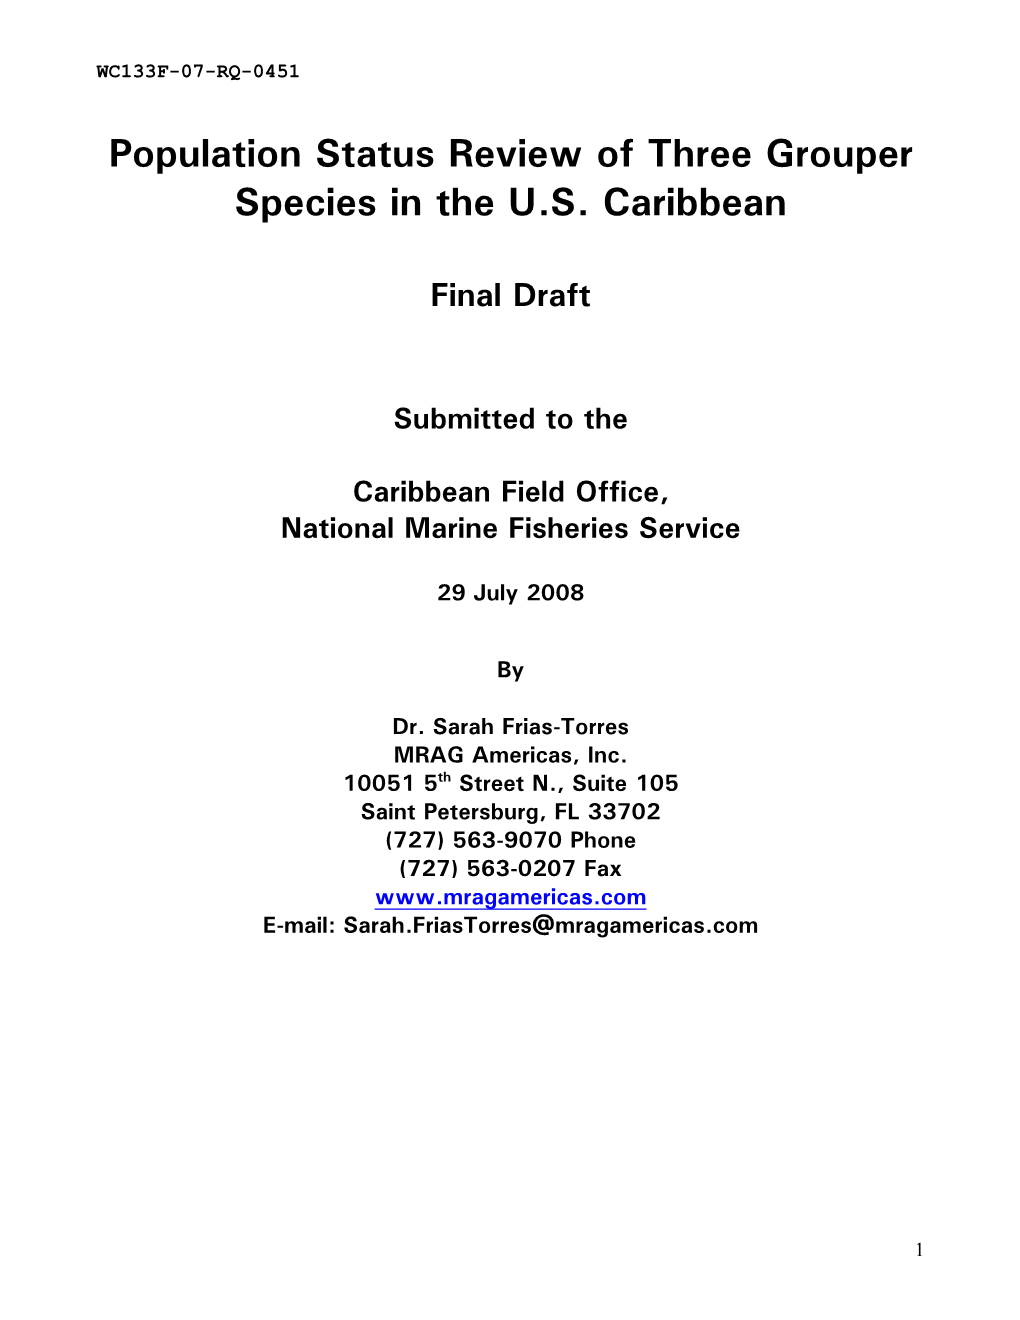 Population Status Review of Three Grouper Species in the U.S. Caribbean